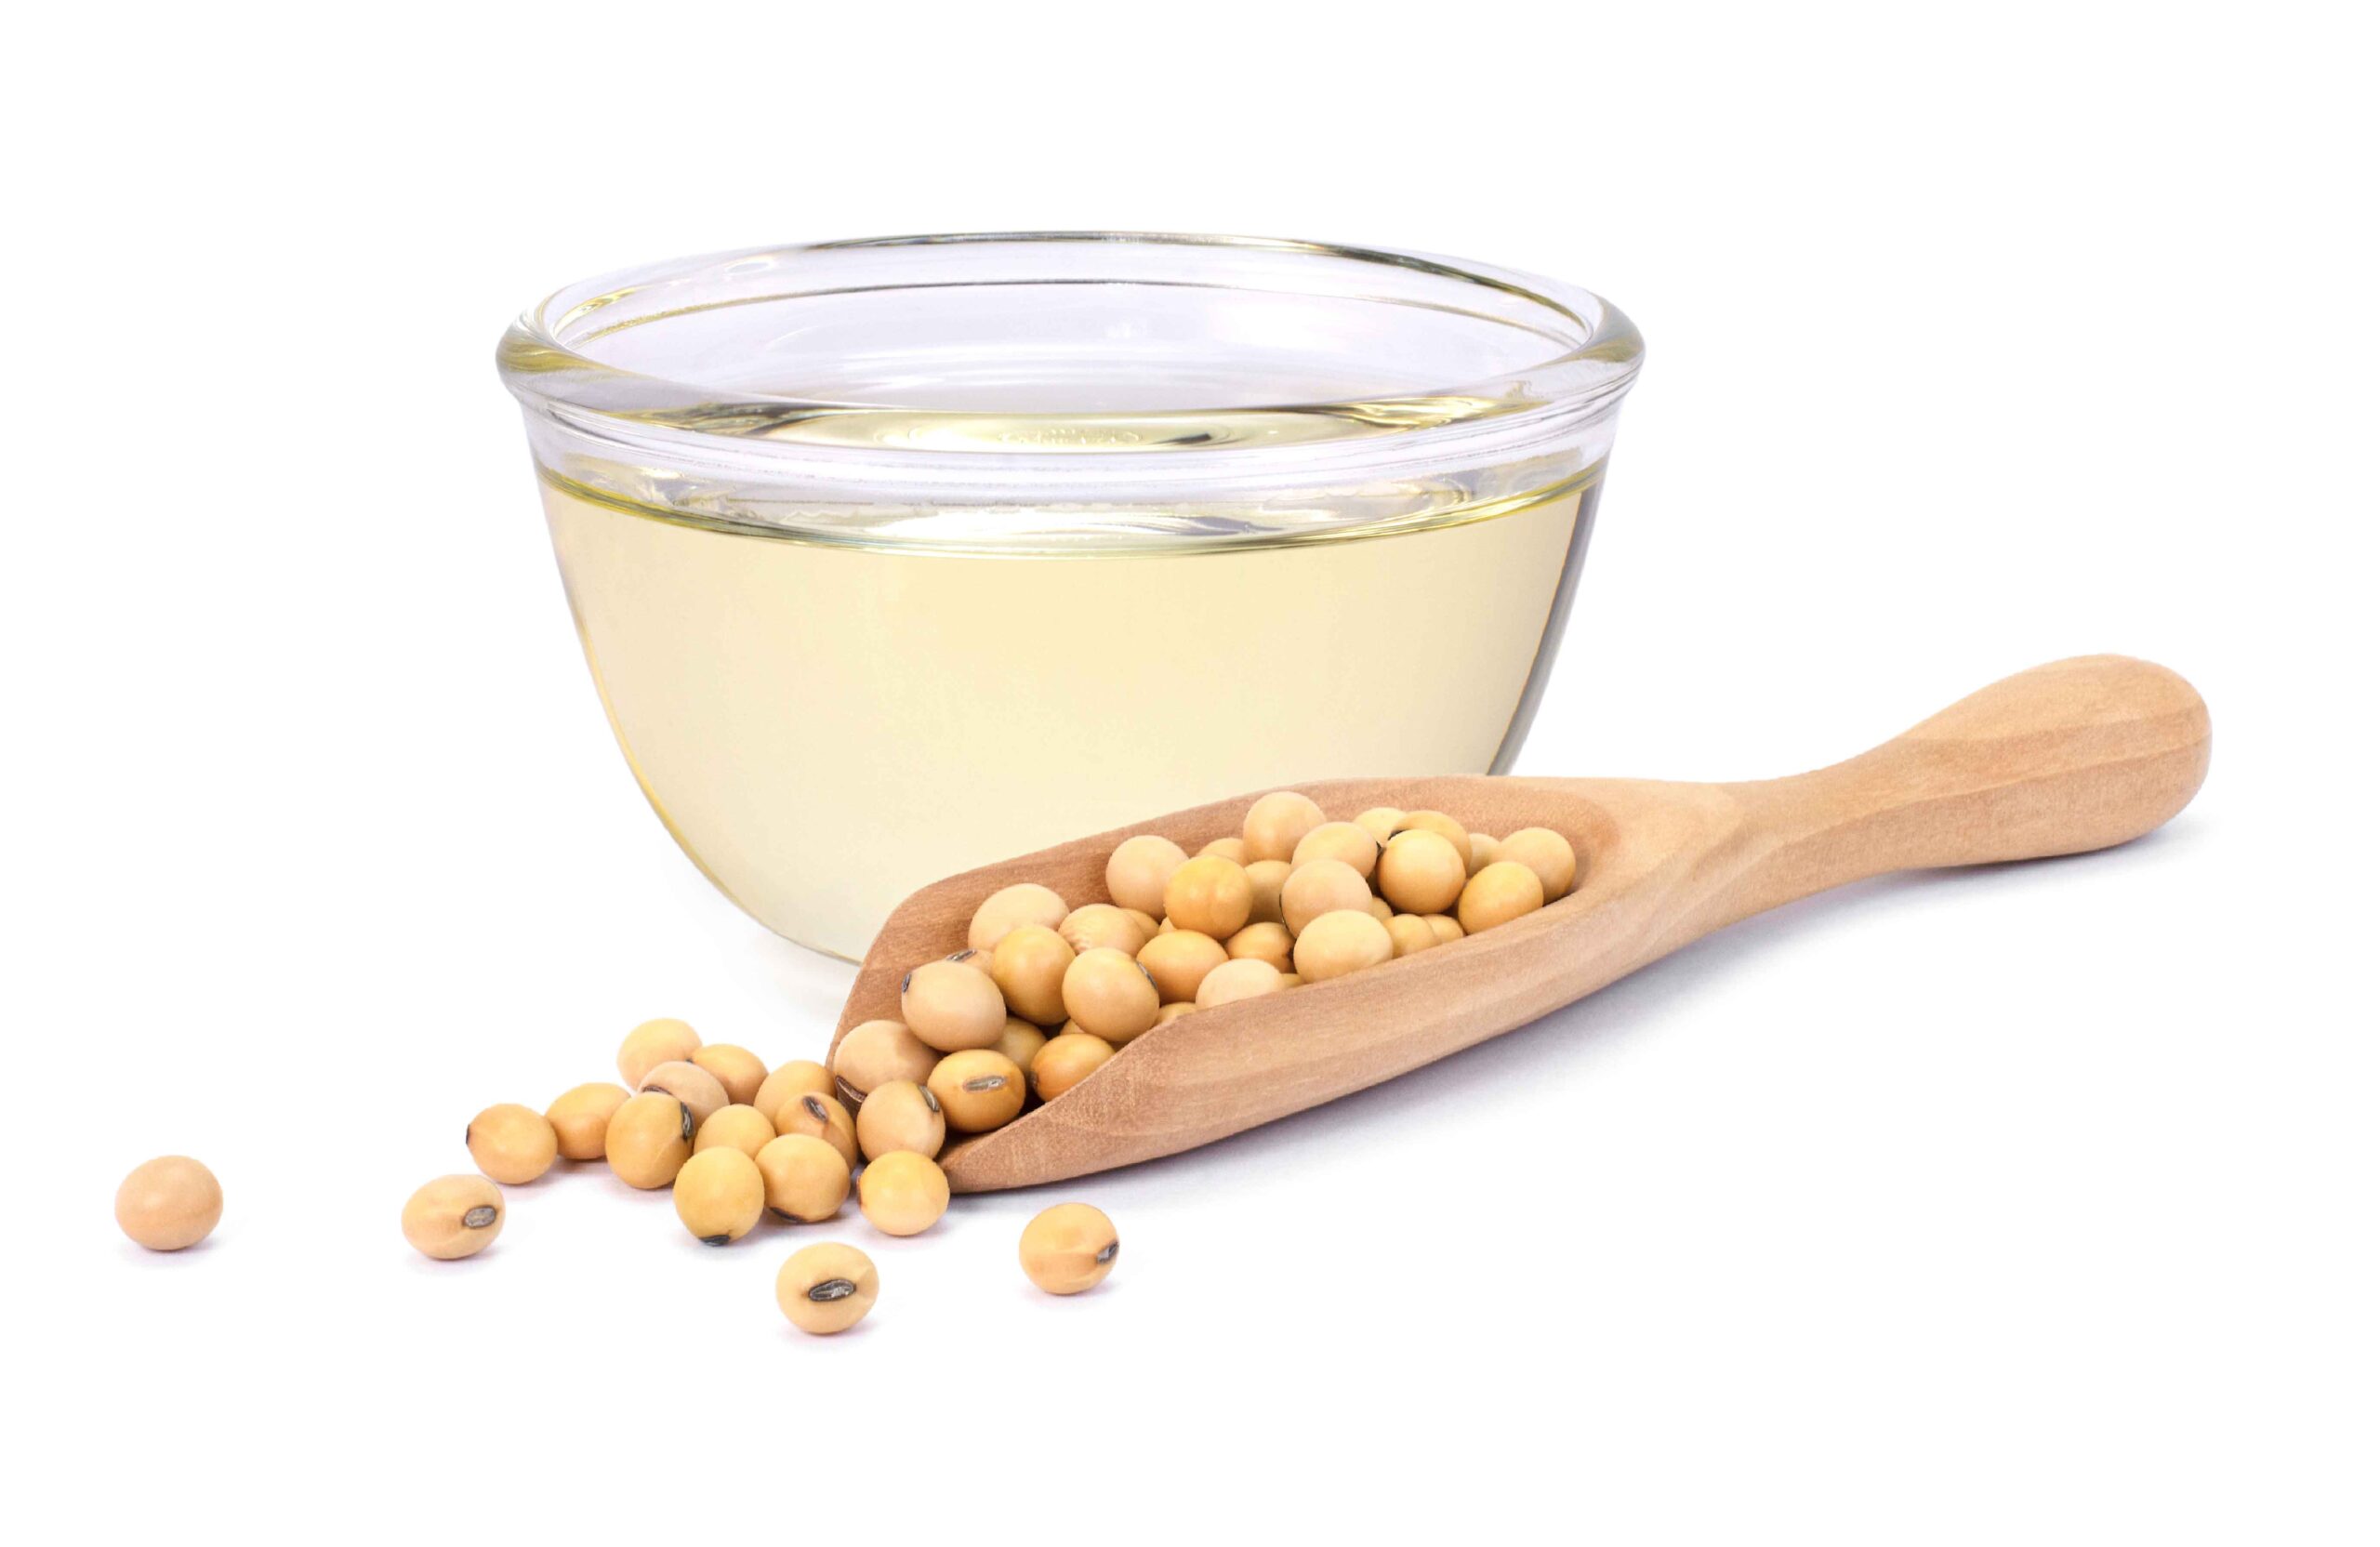 A glass bowl of soybean oil with a wooden scoop of soybeans on a white background.